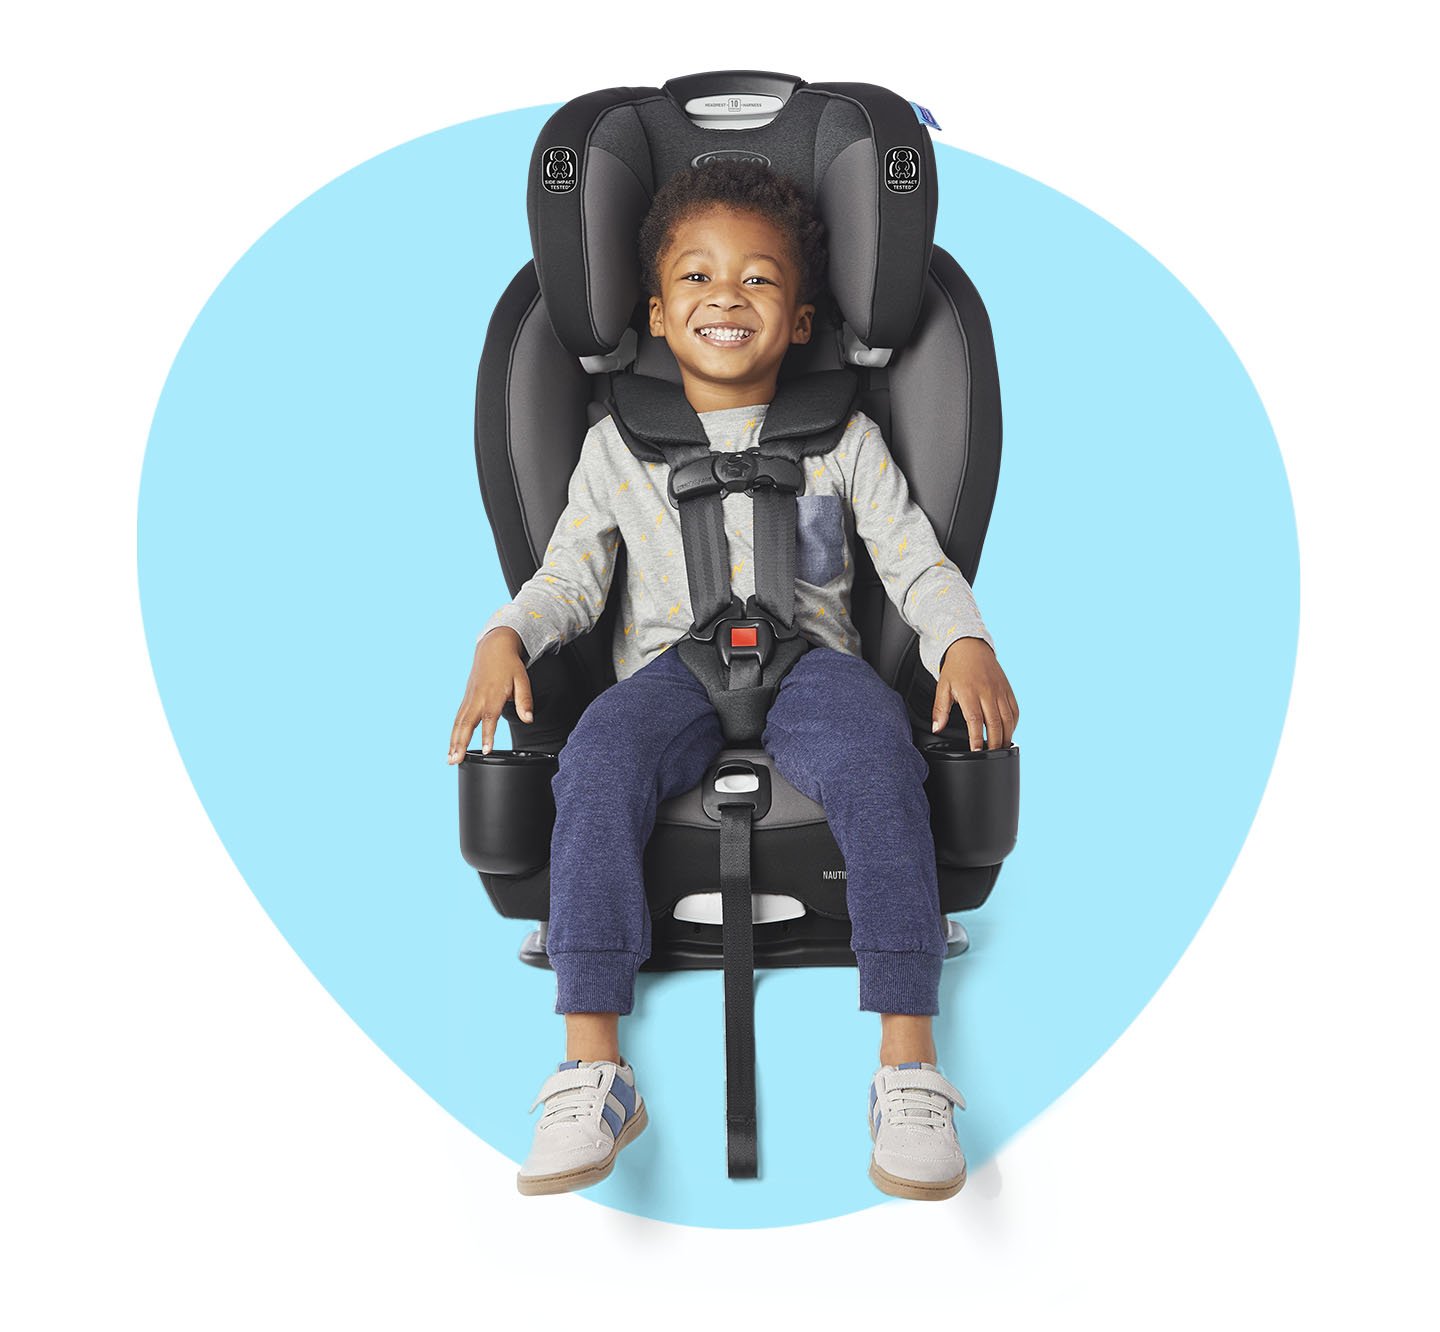 Graco's Car Seat Safety Standards